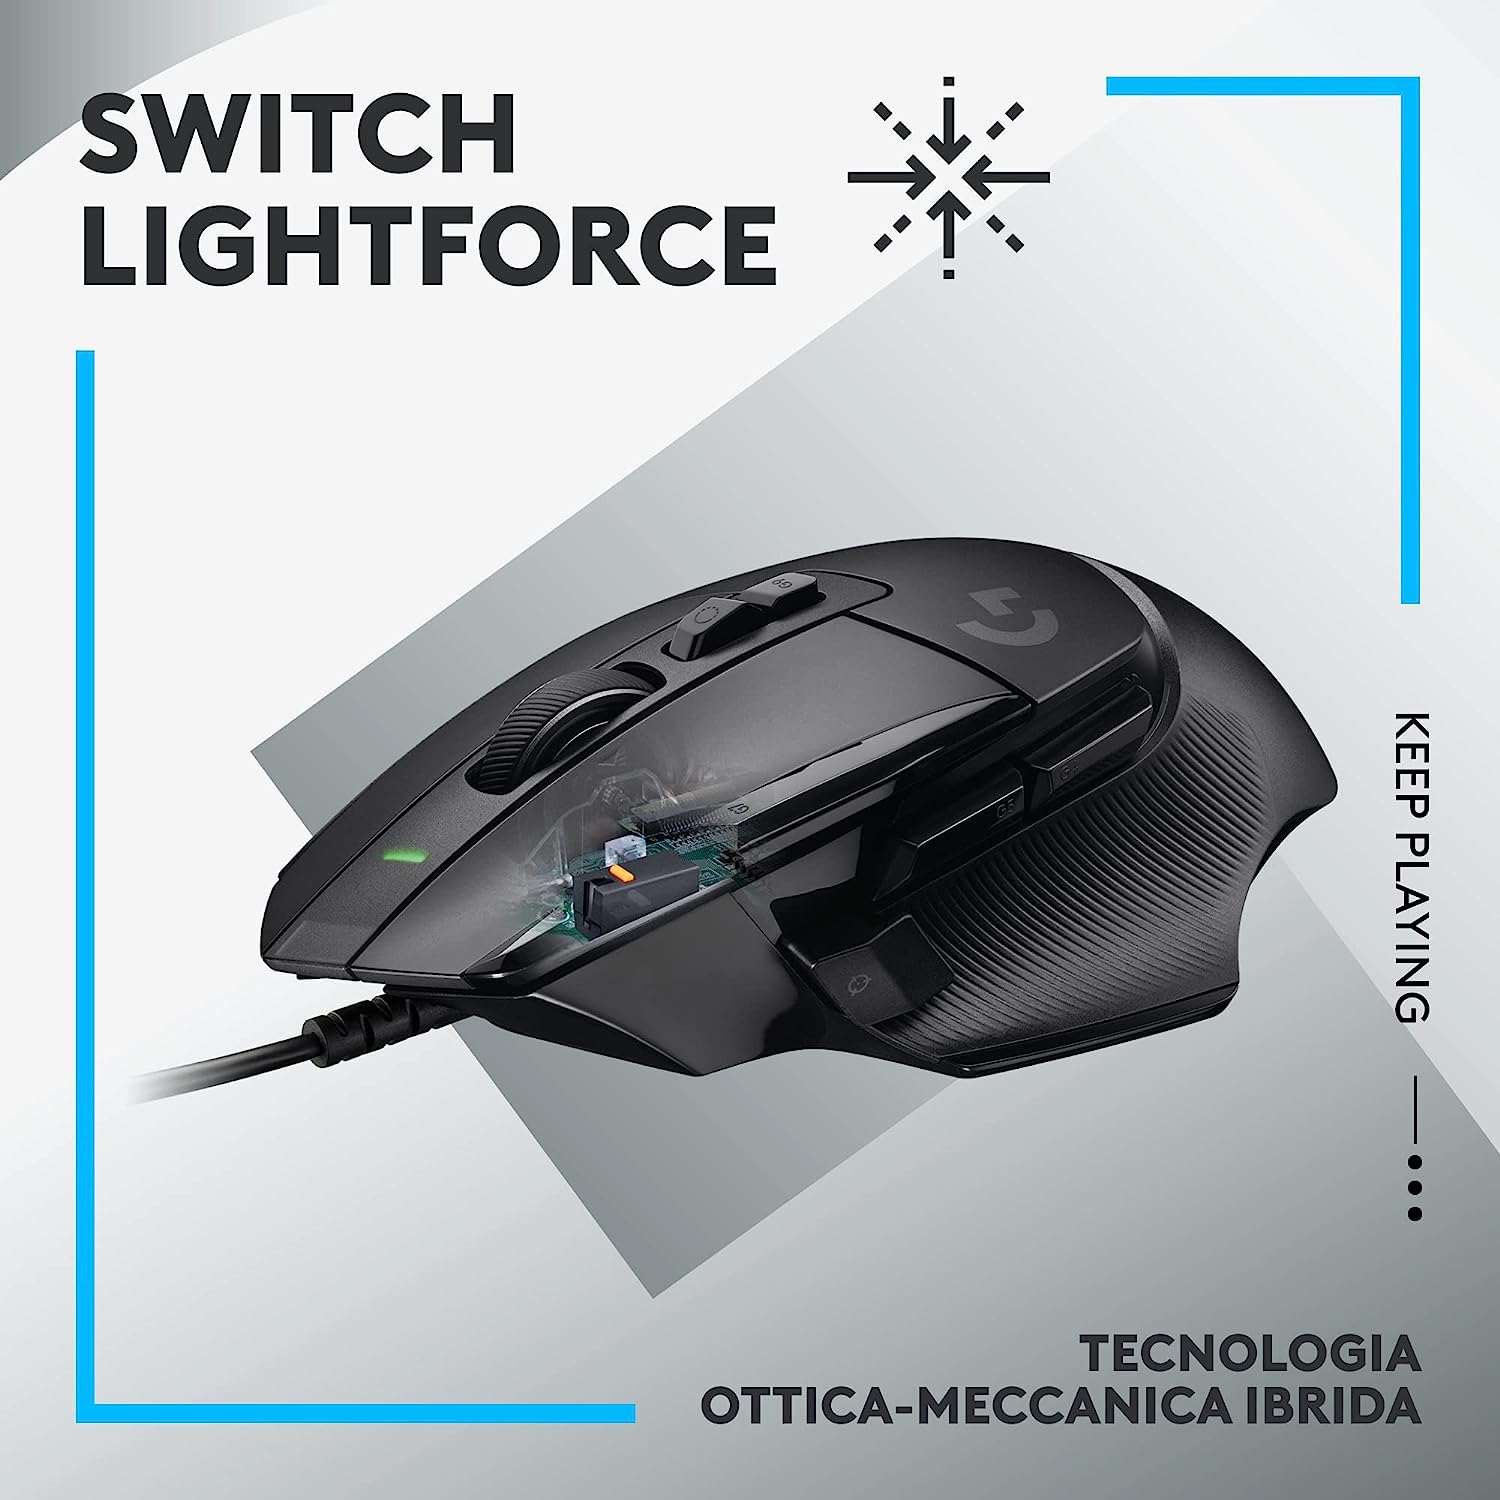 Logitech 910006139 Mouse Wlss Gaming G502 X Nero